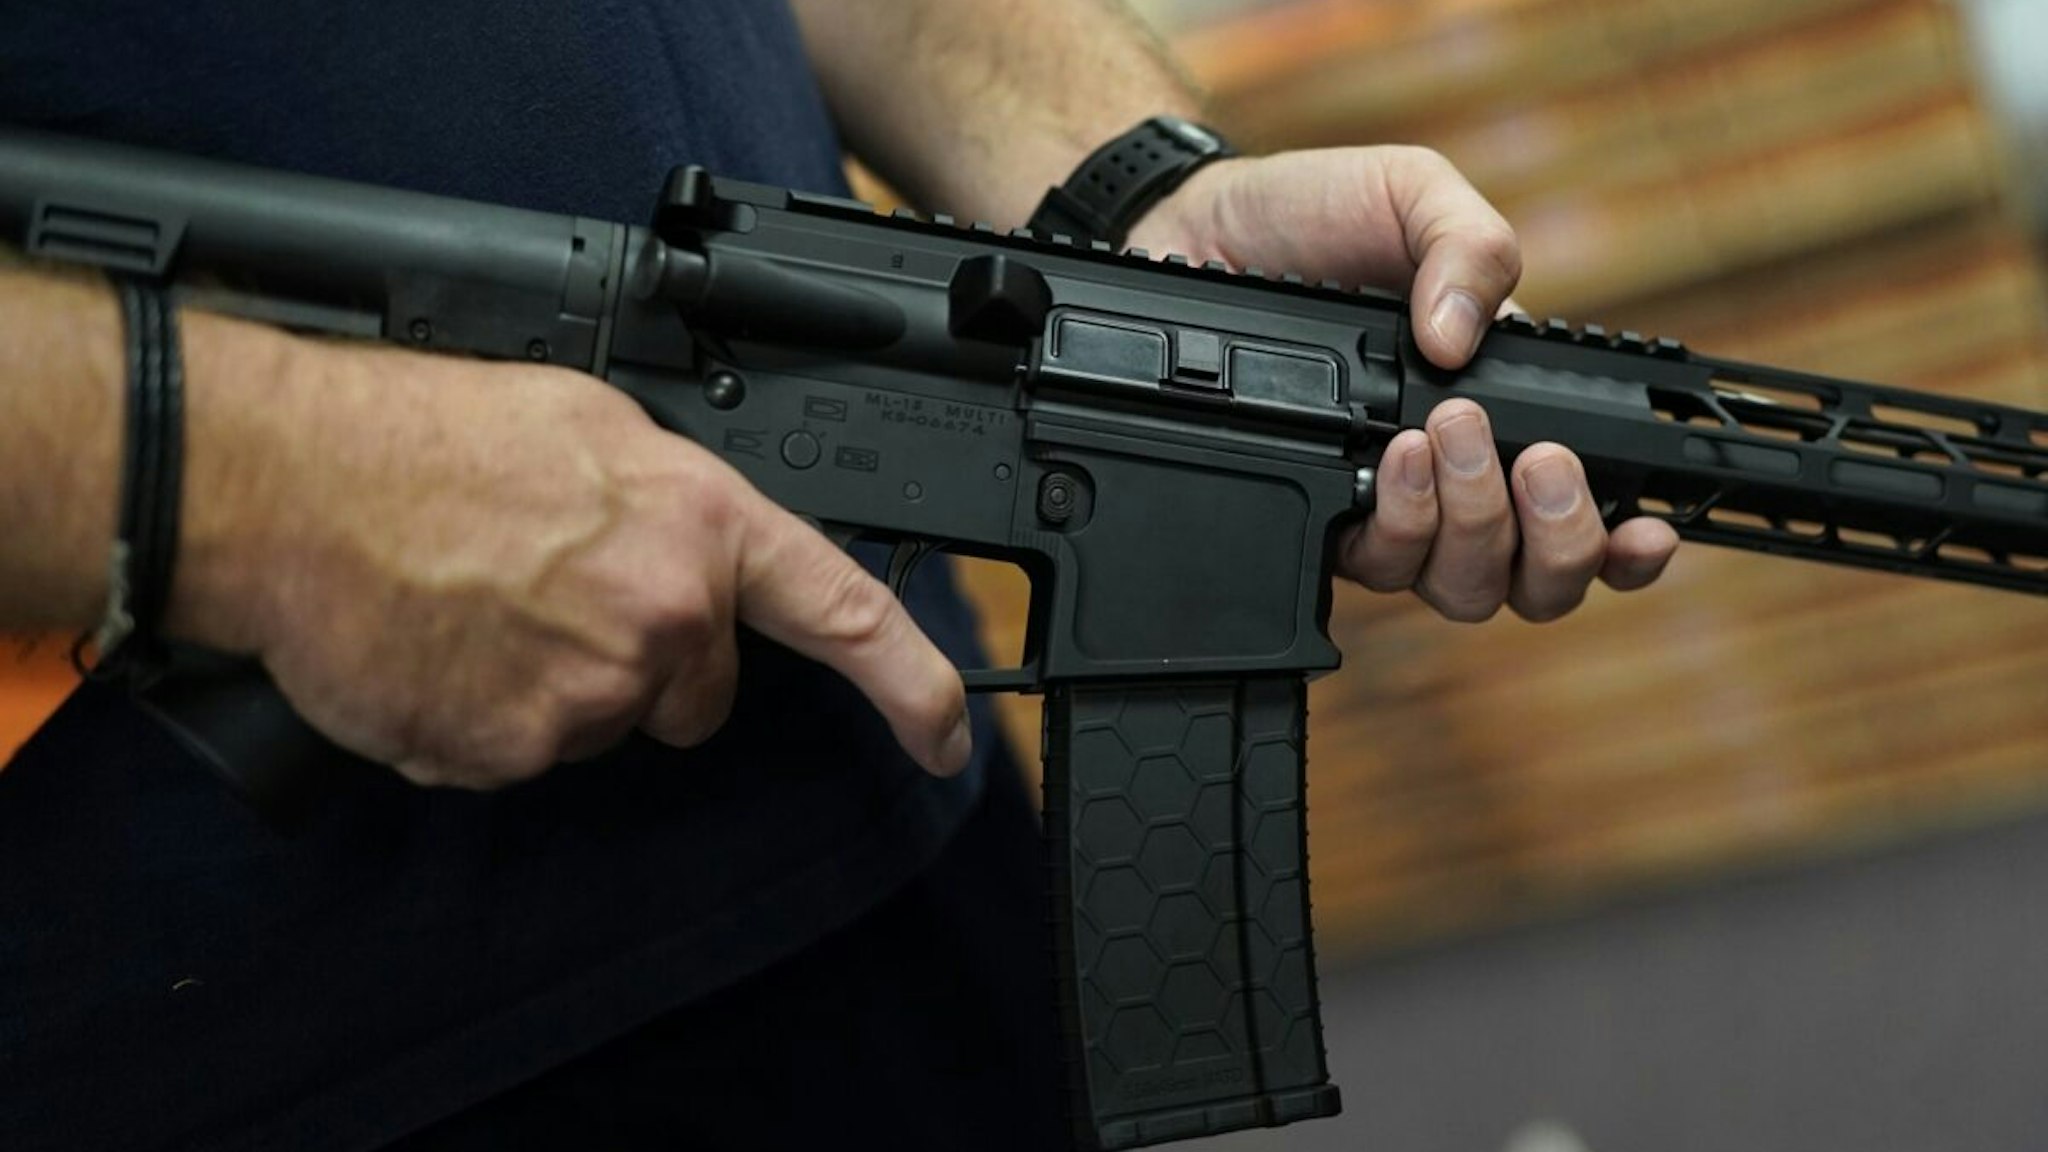 A customer handles an AR-15 at Jimmy's Sport Shop in Mineola, New York on September 25, 2020